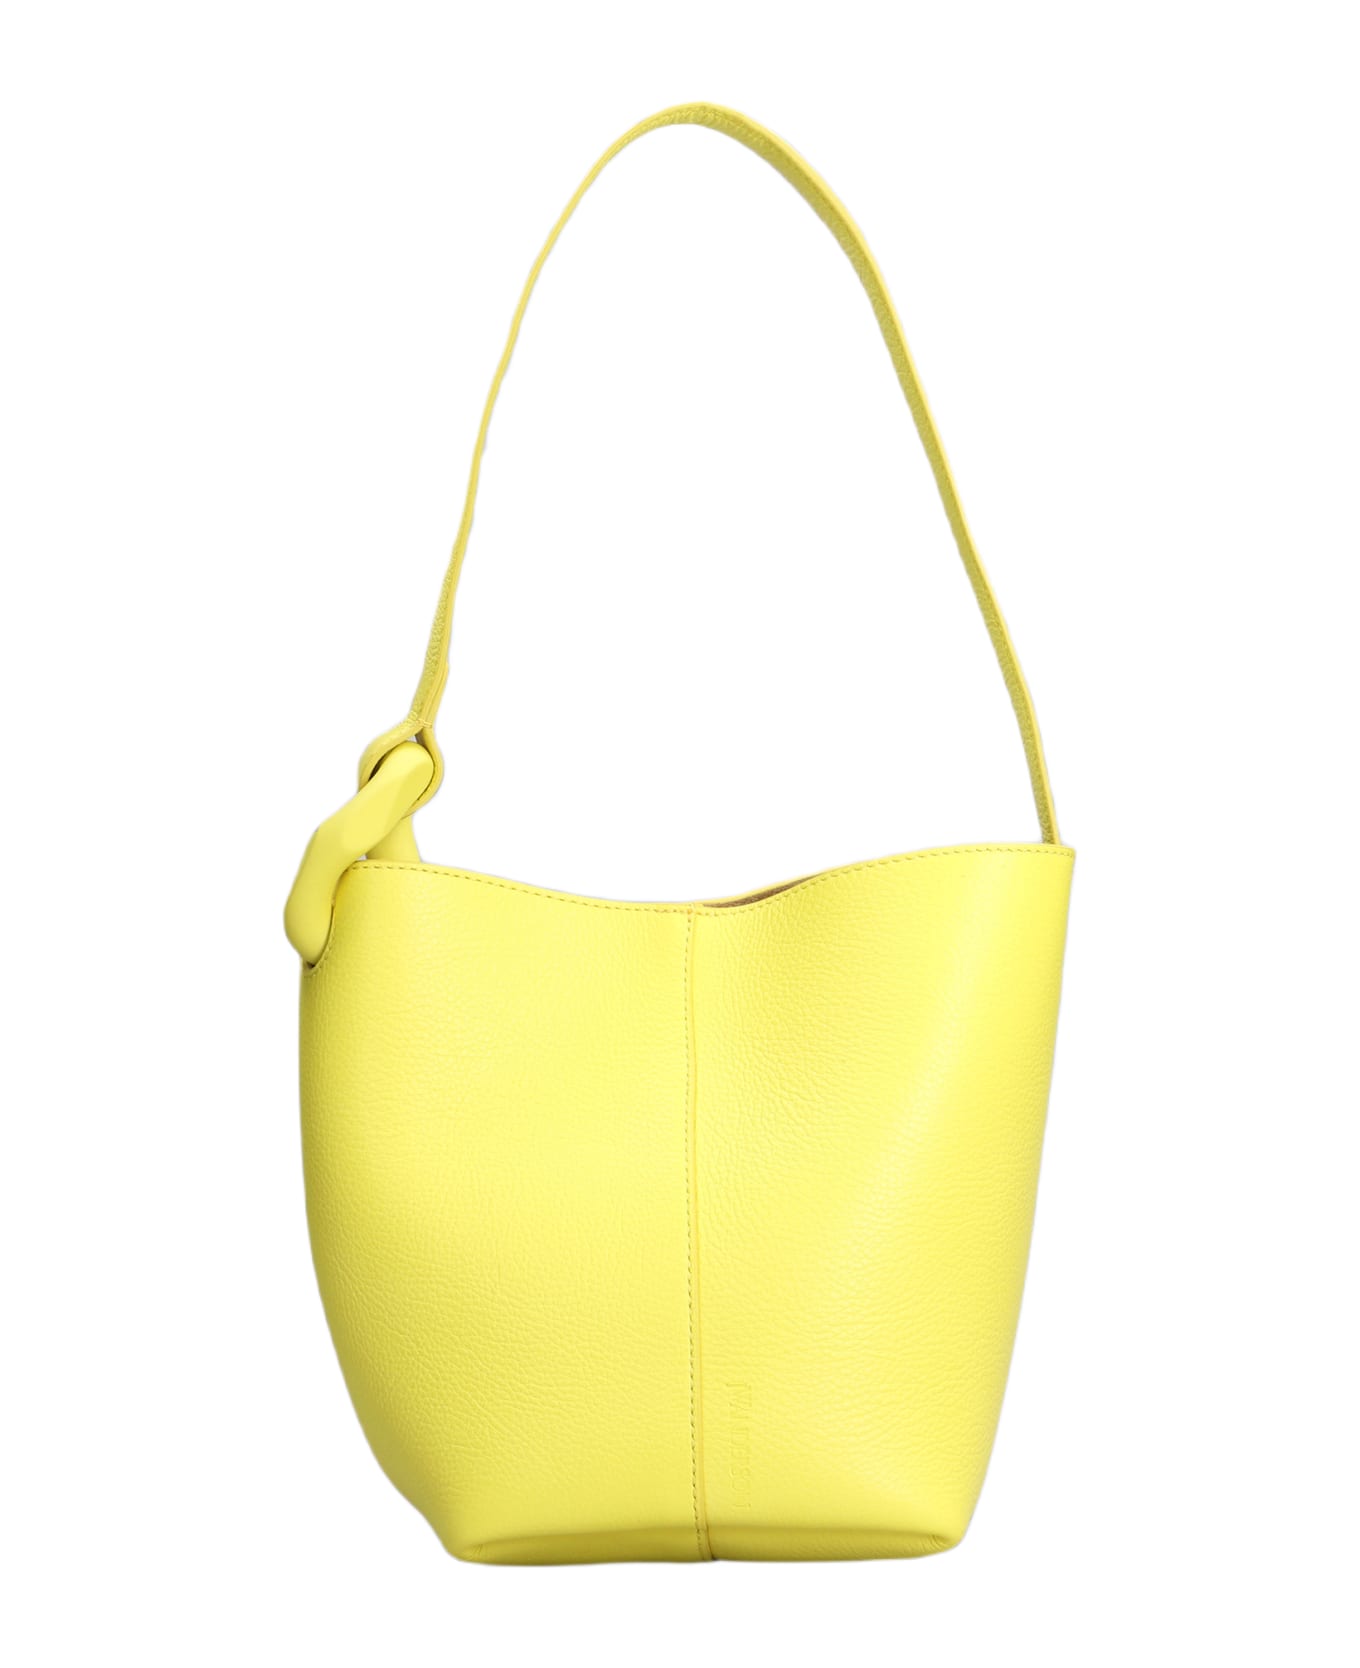 J.W. Anderson Corner Shoulder Bag In Yellow Leather - yellow